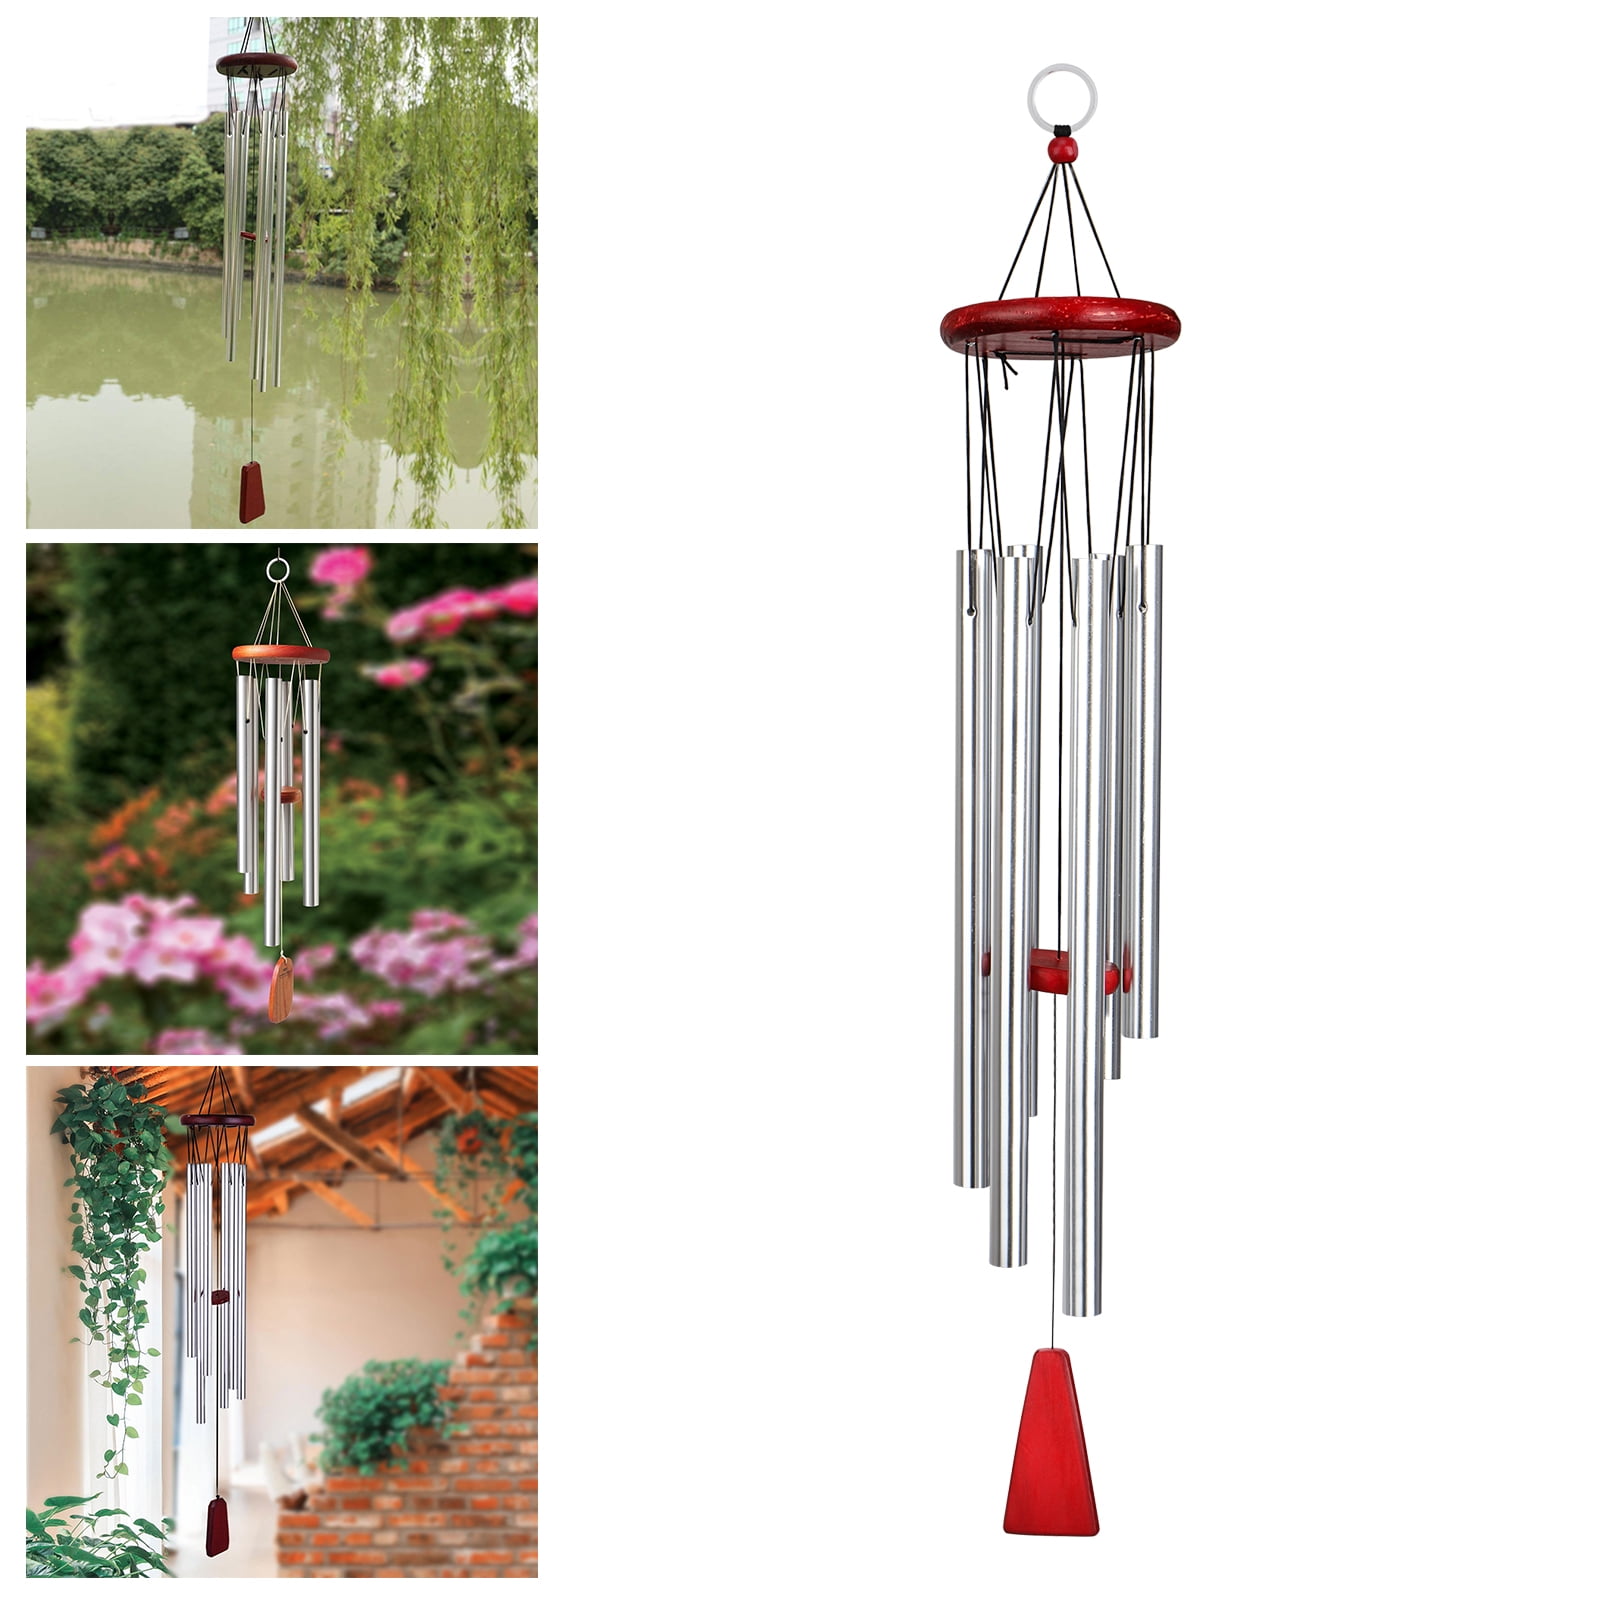 1x Large Wind Chimes Bells Gold Tubes Outdoor Garden Home Decoration Ornament 